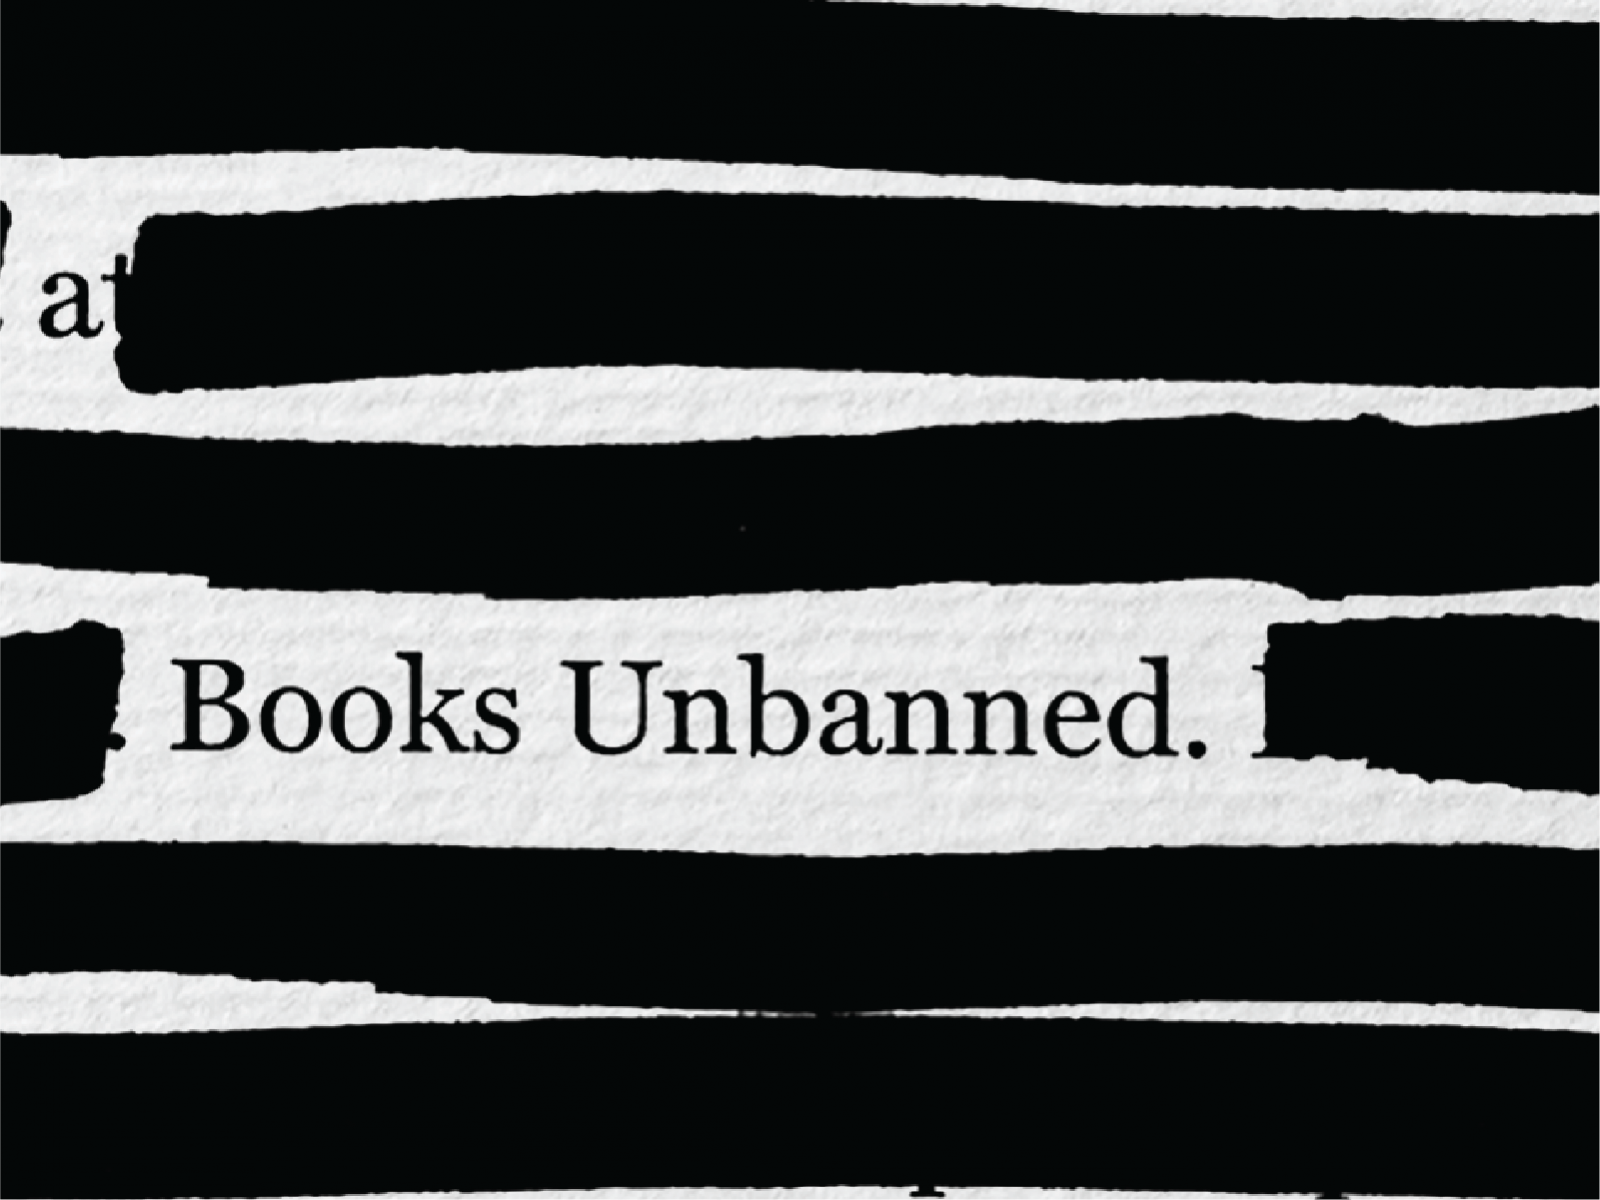 Redacted words on paper with words Books Unbanned still visible